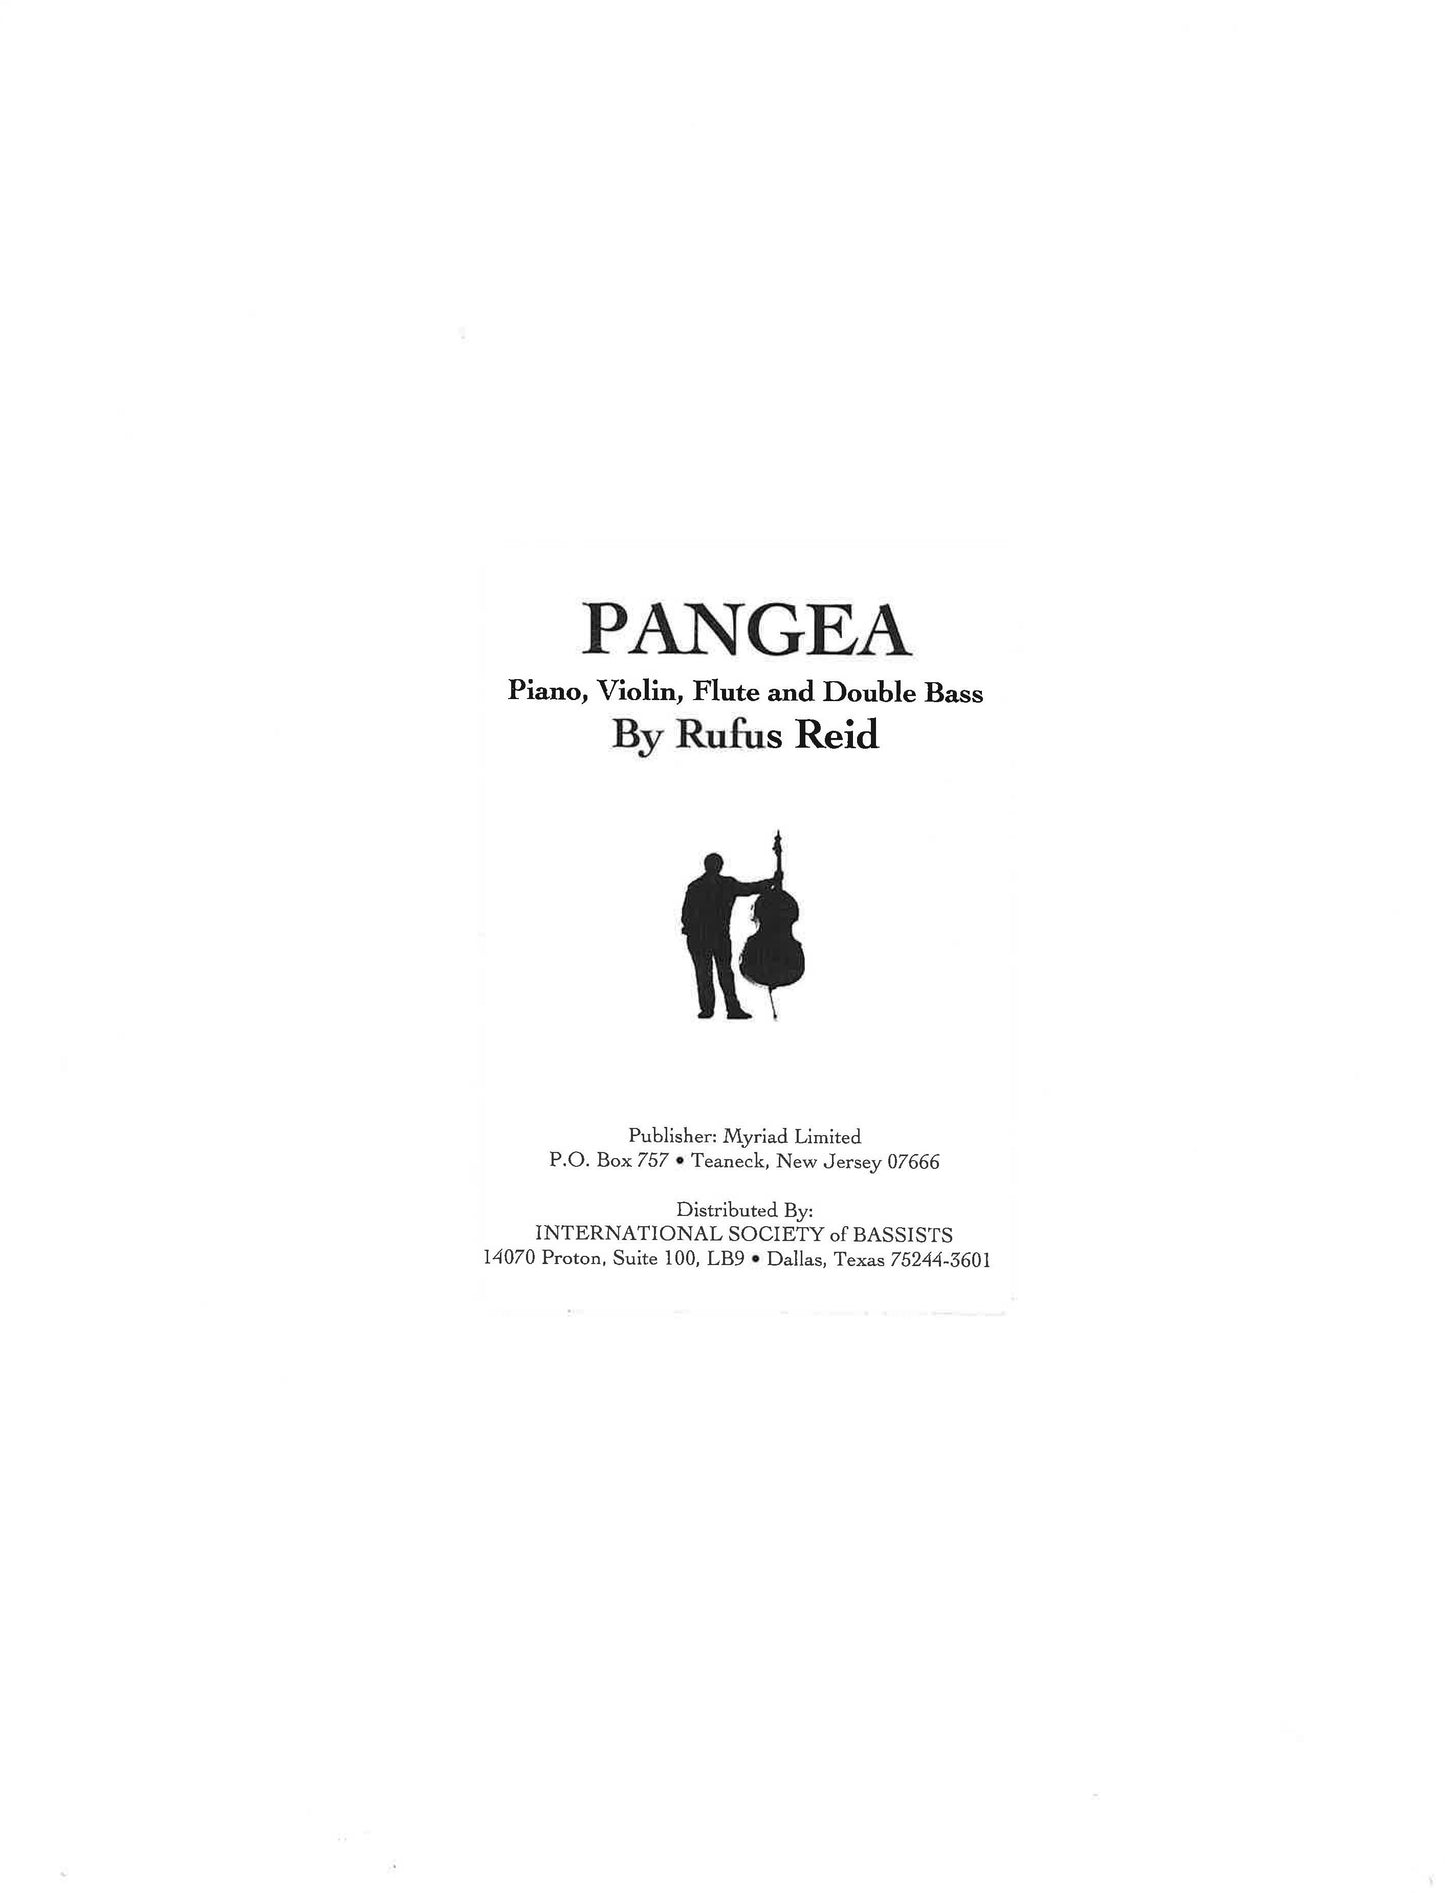 Reid: Pangea for Piano, Violin, Flute and Double Bass